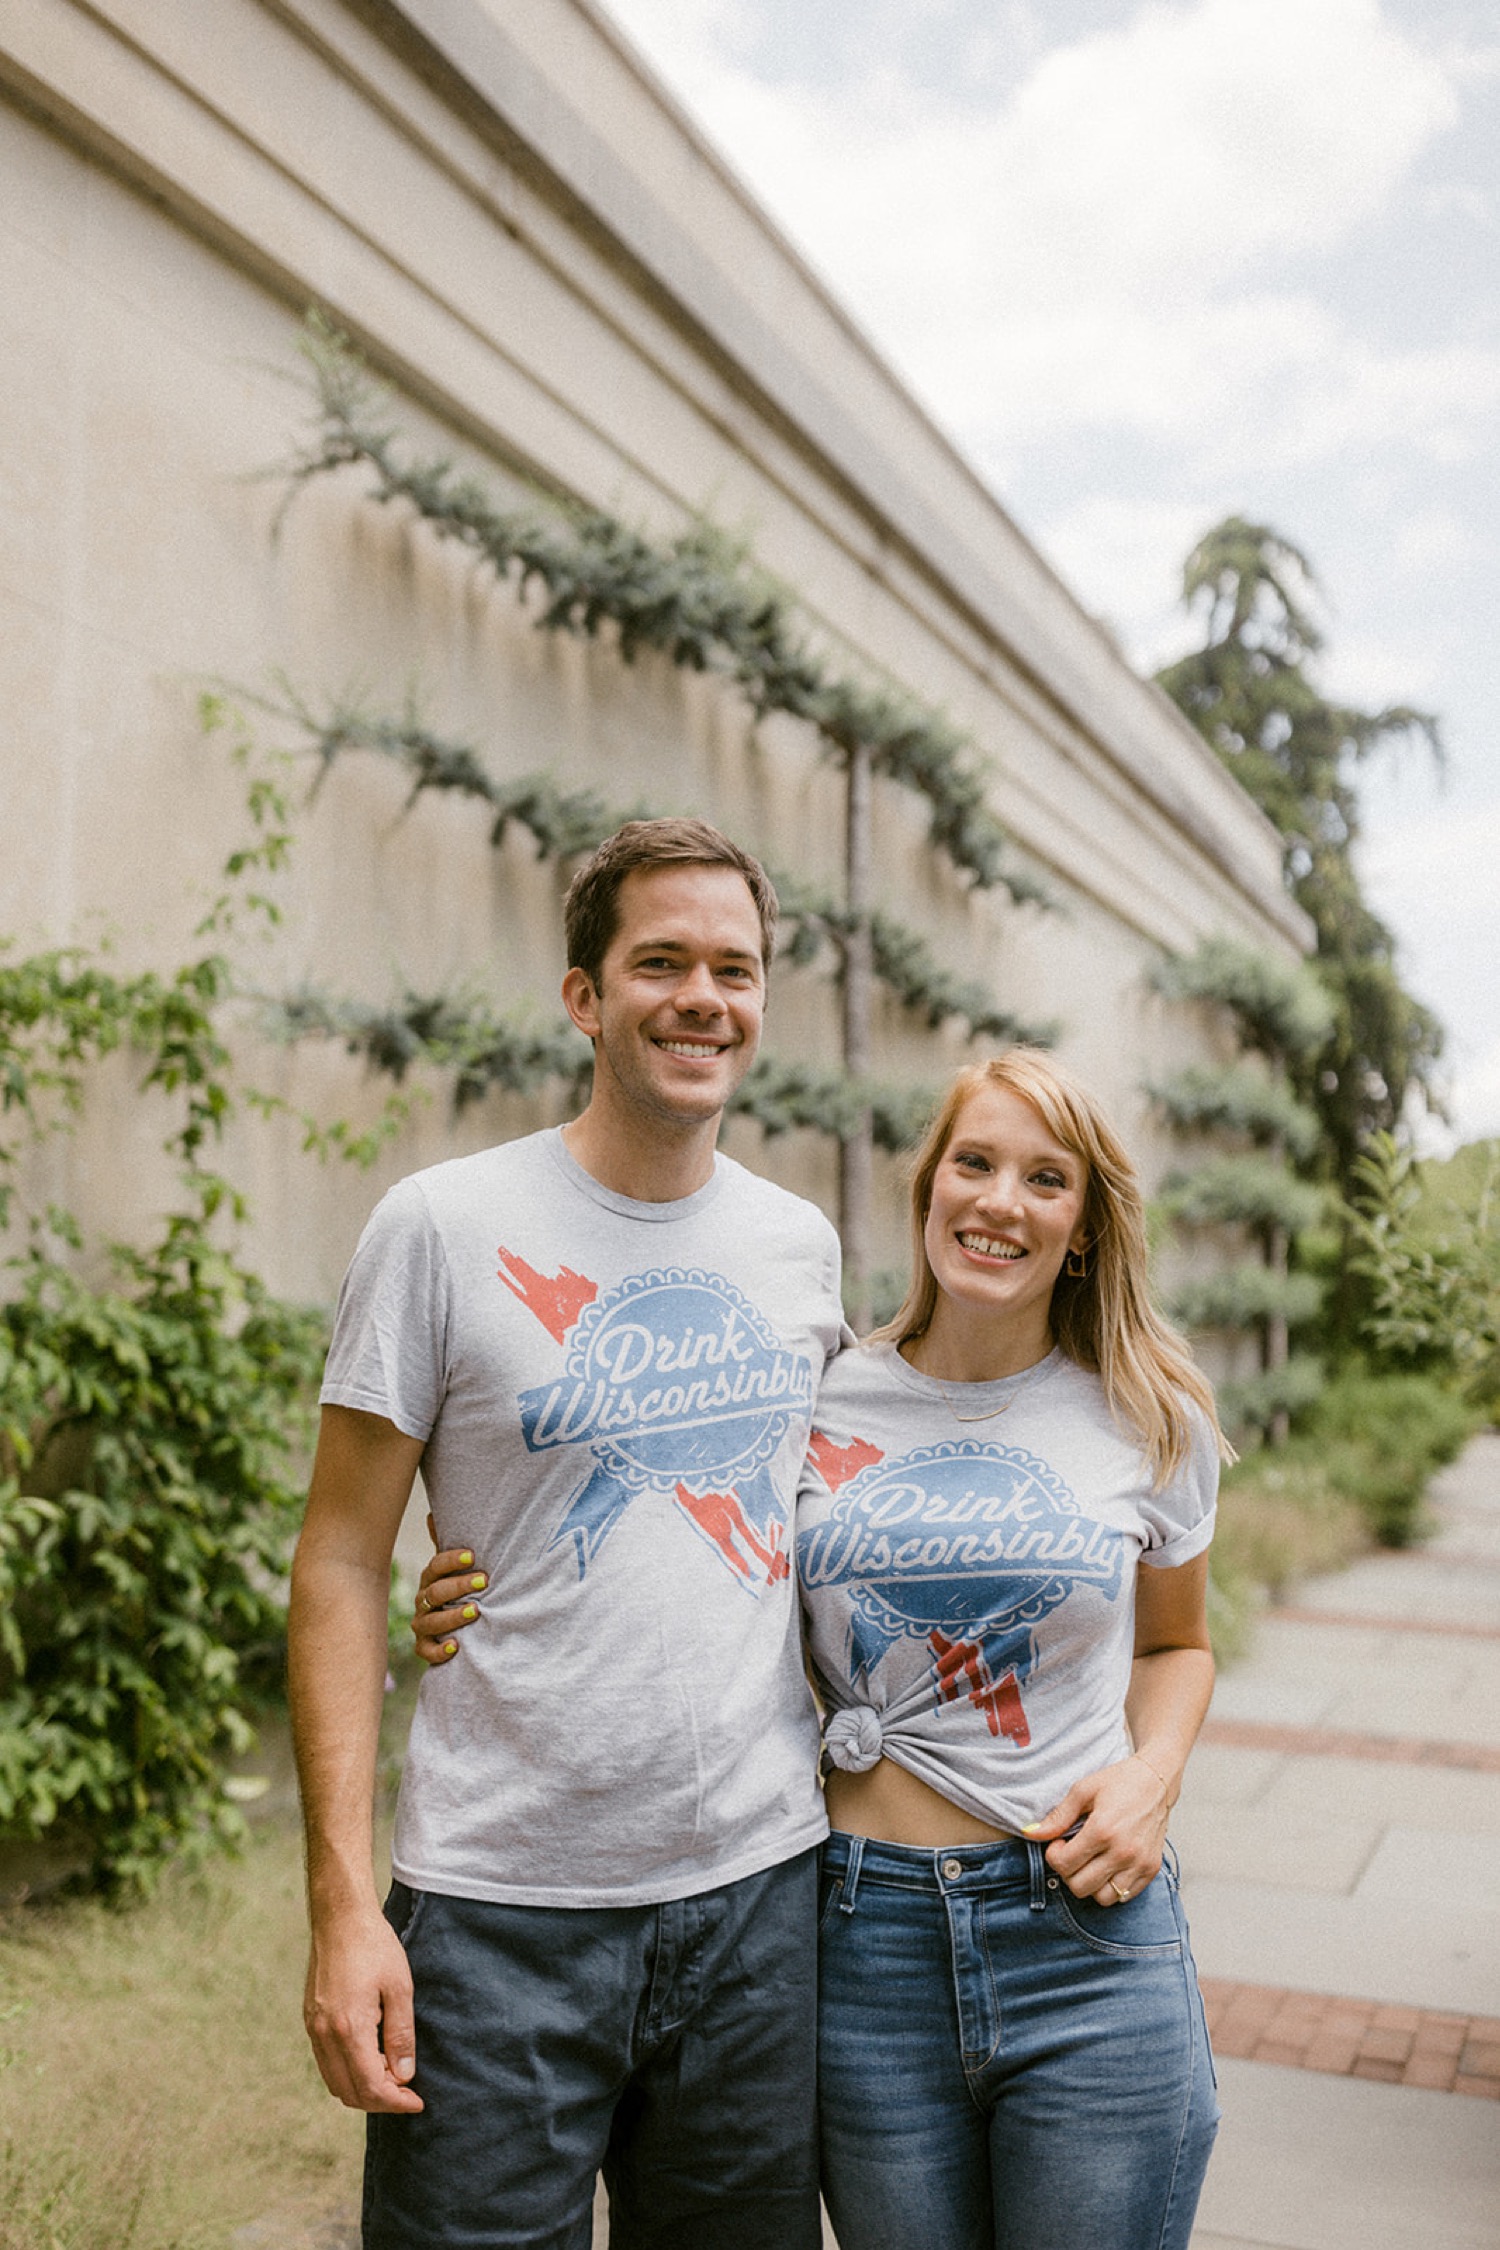 drink wisconsibly pabst tshirts couple engagment session